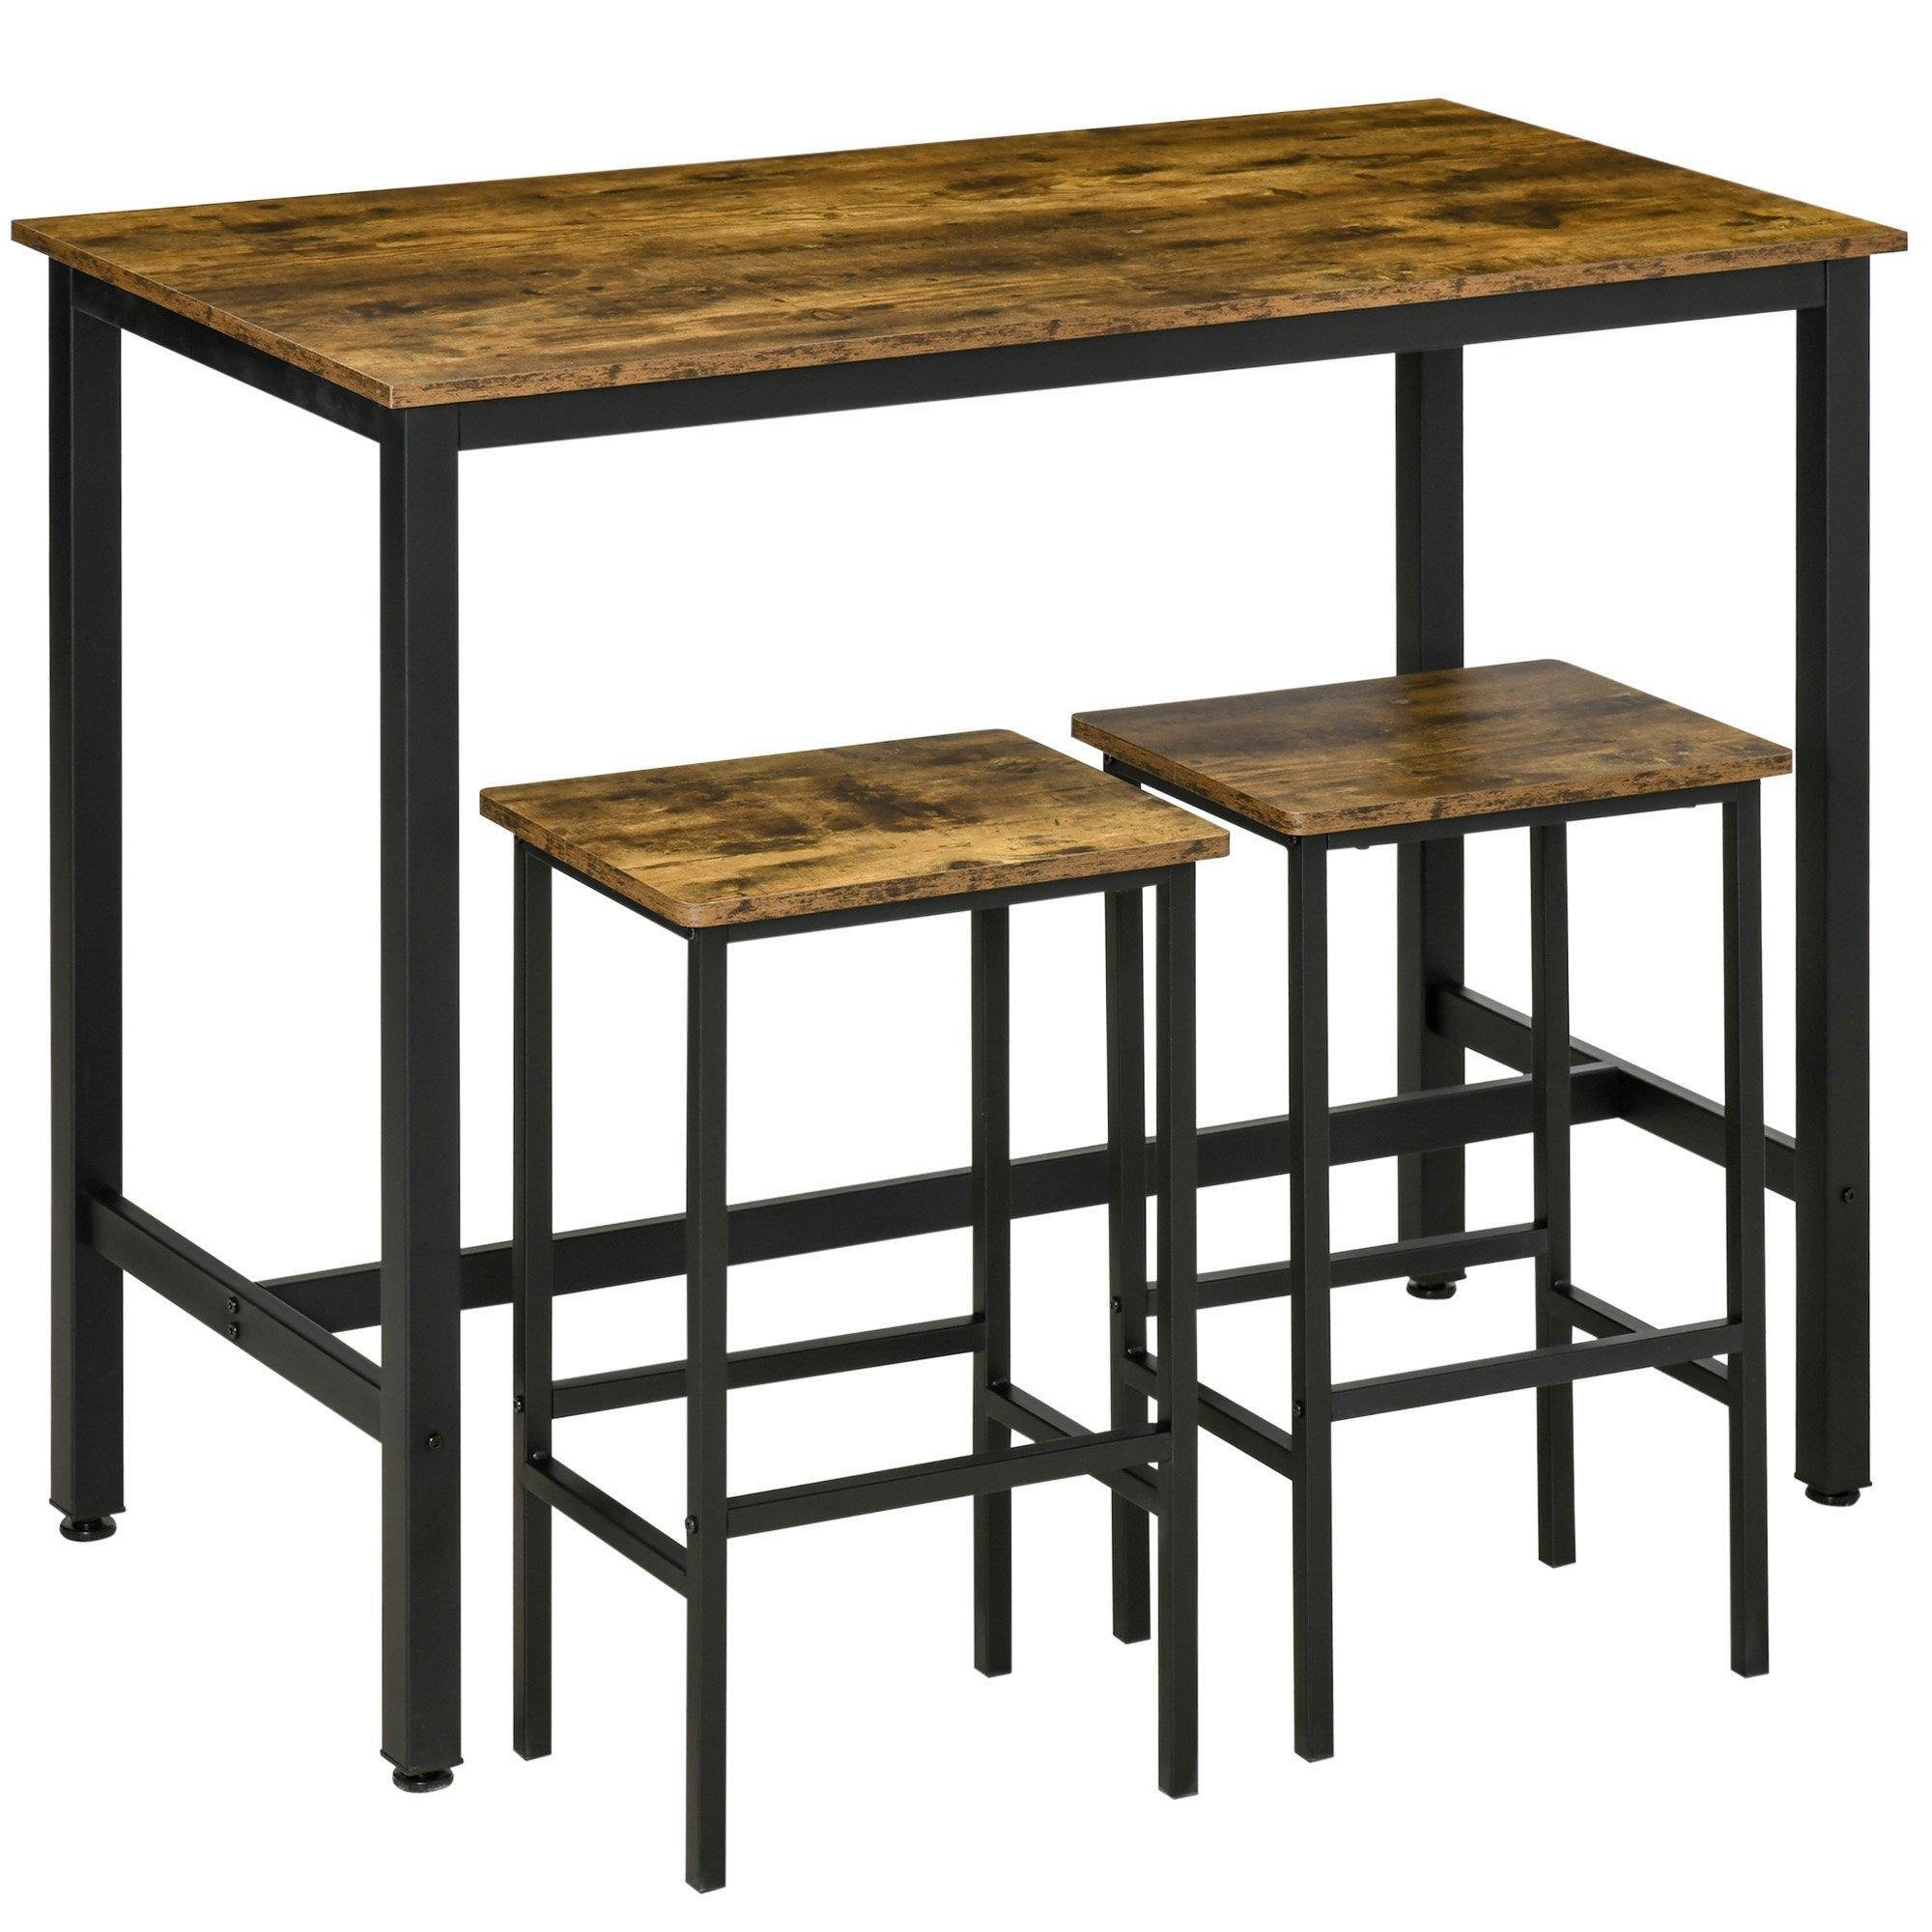 3 Piece Industrial Bar Table Set Breakfast Table with 2 Stools - image 1